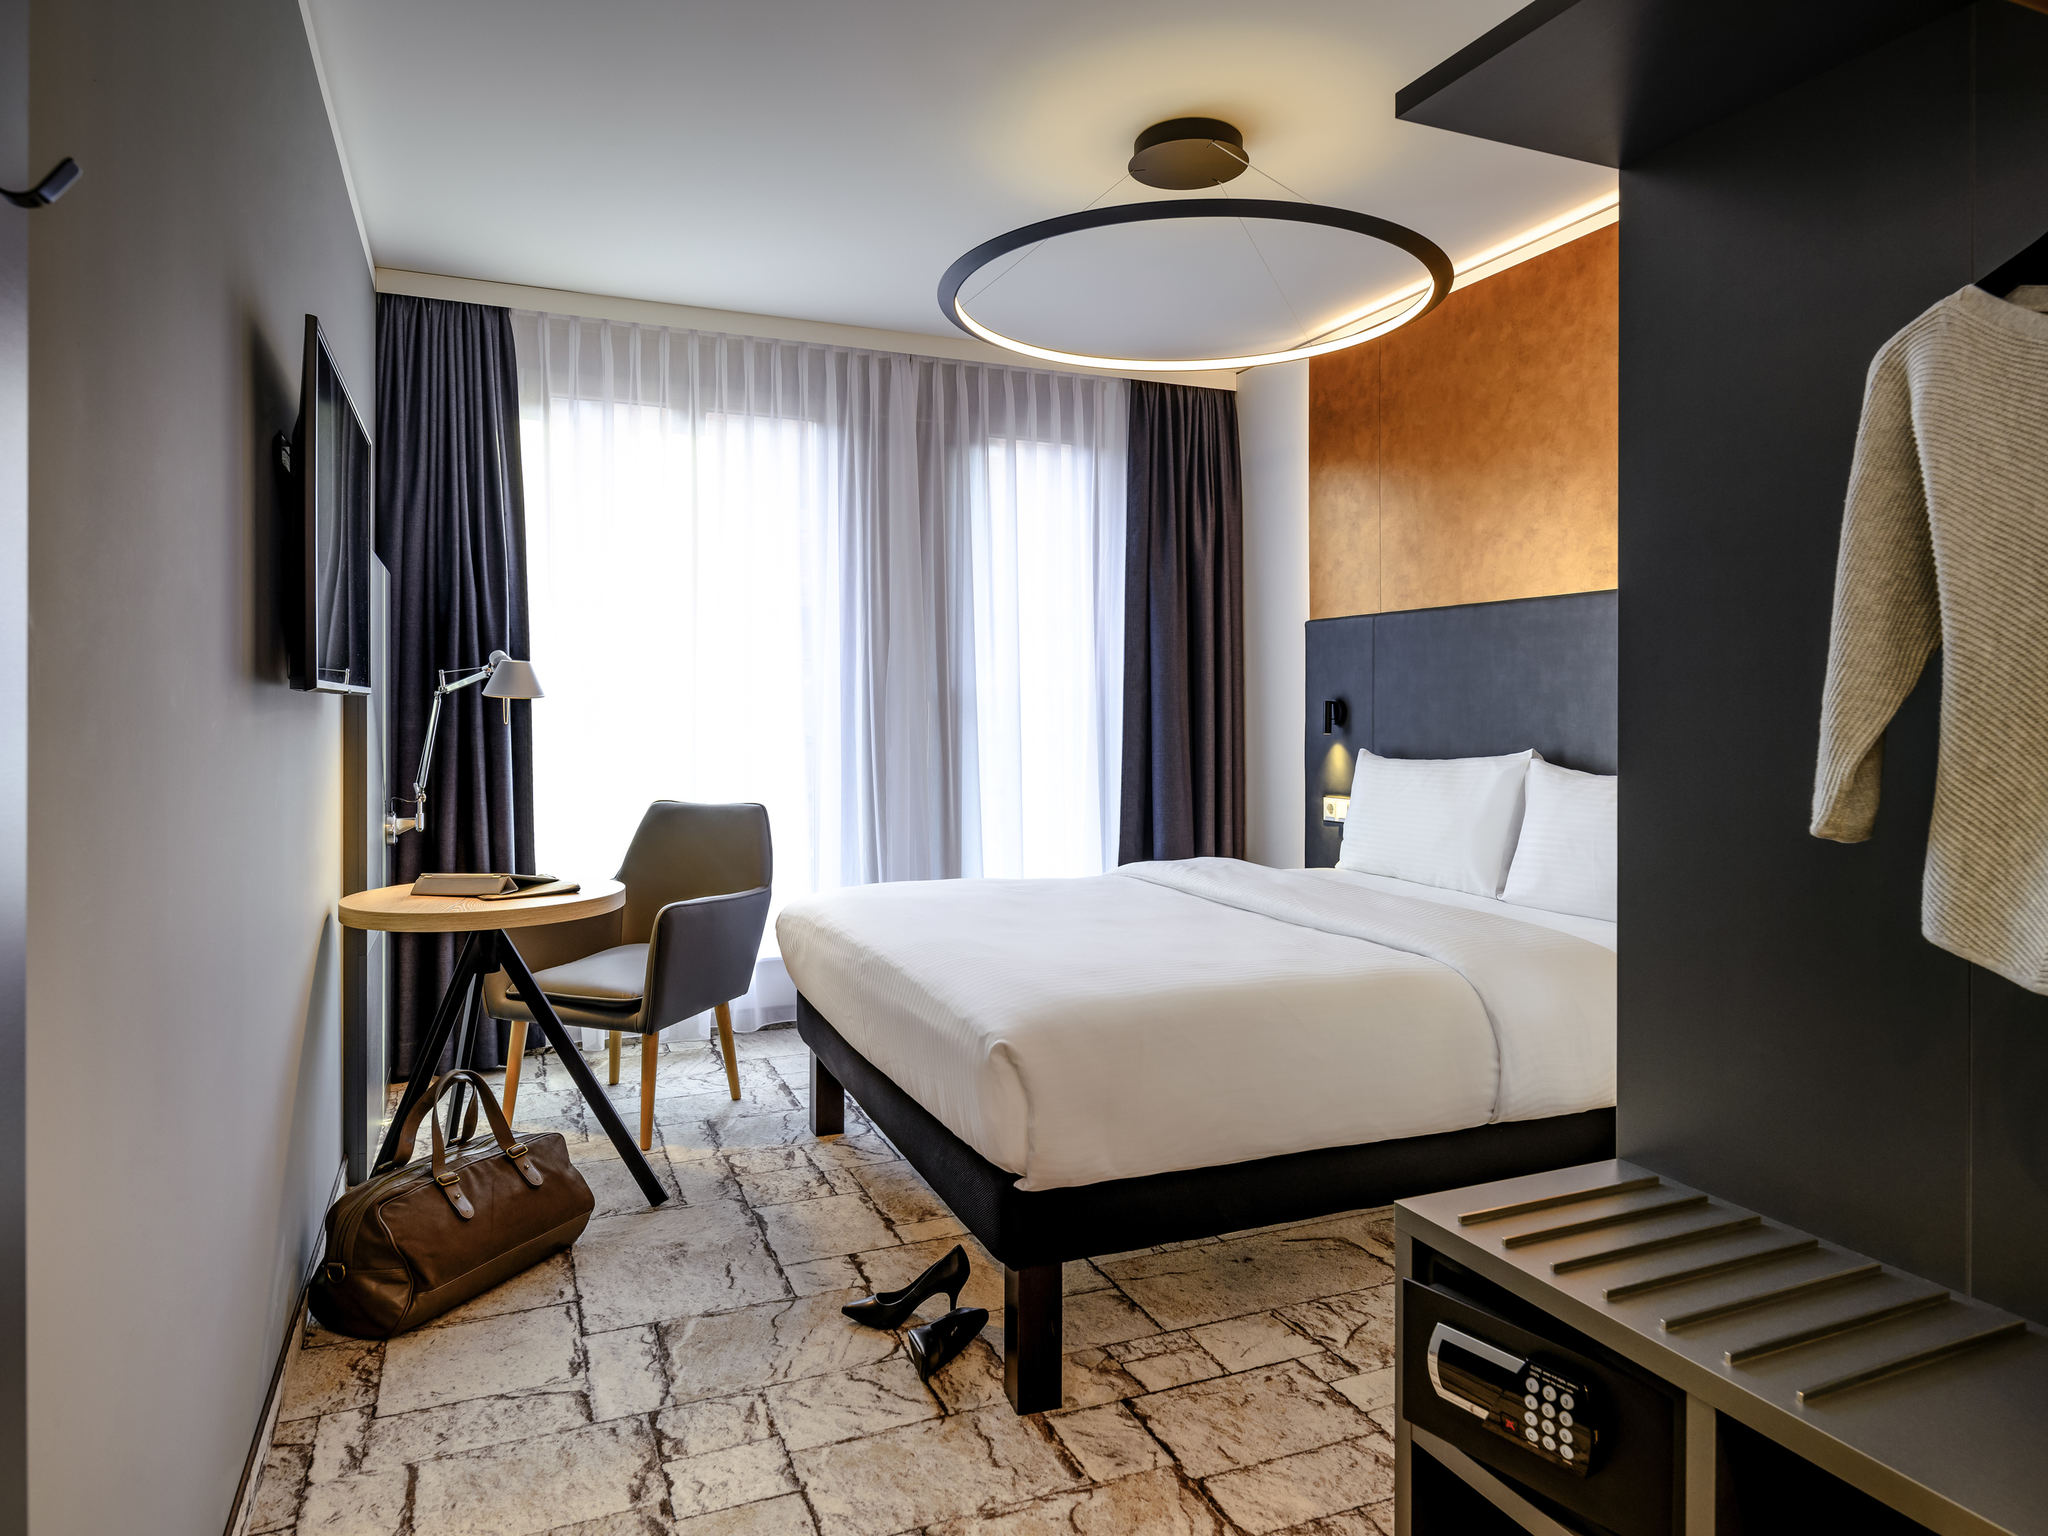 Ibis Styles Bamberg Hotel-Bamberg Updated 2022 Room Price-Reviews & Deals |  Trip.com